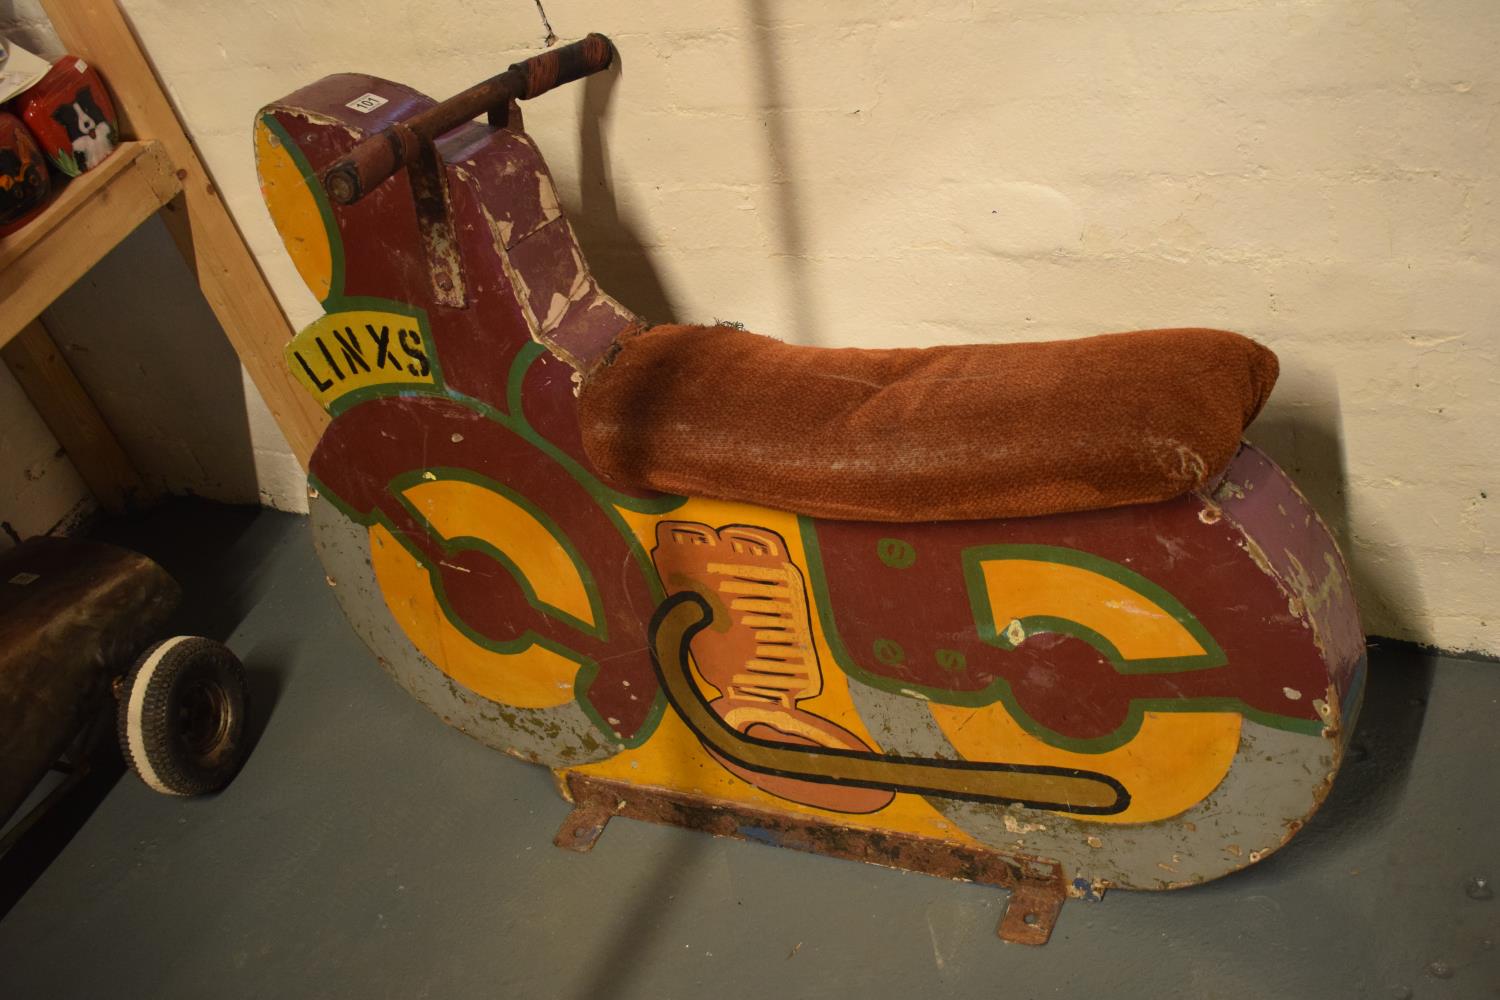 1950s speedway bike from a fairground ride - Image 2 of 7